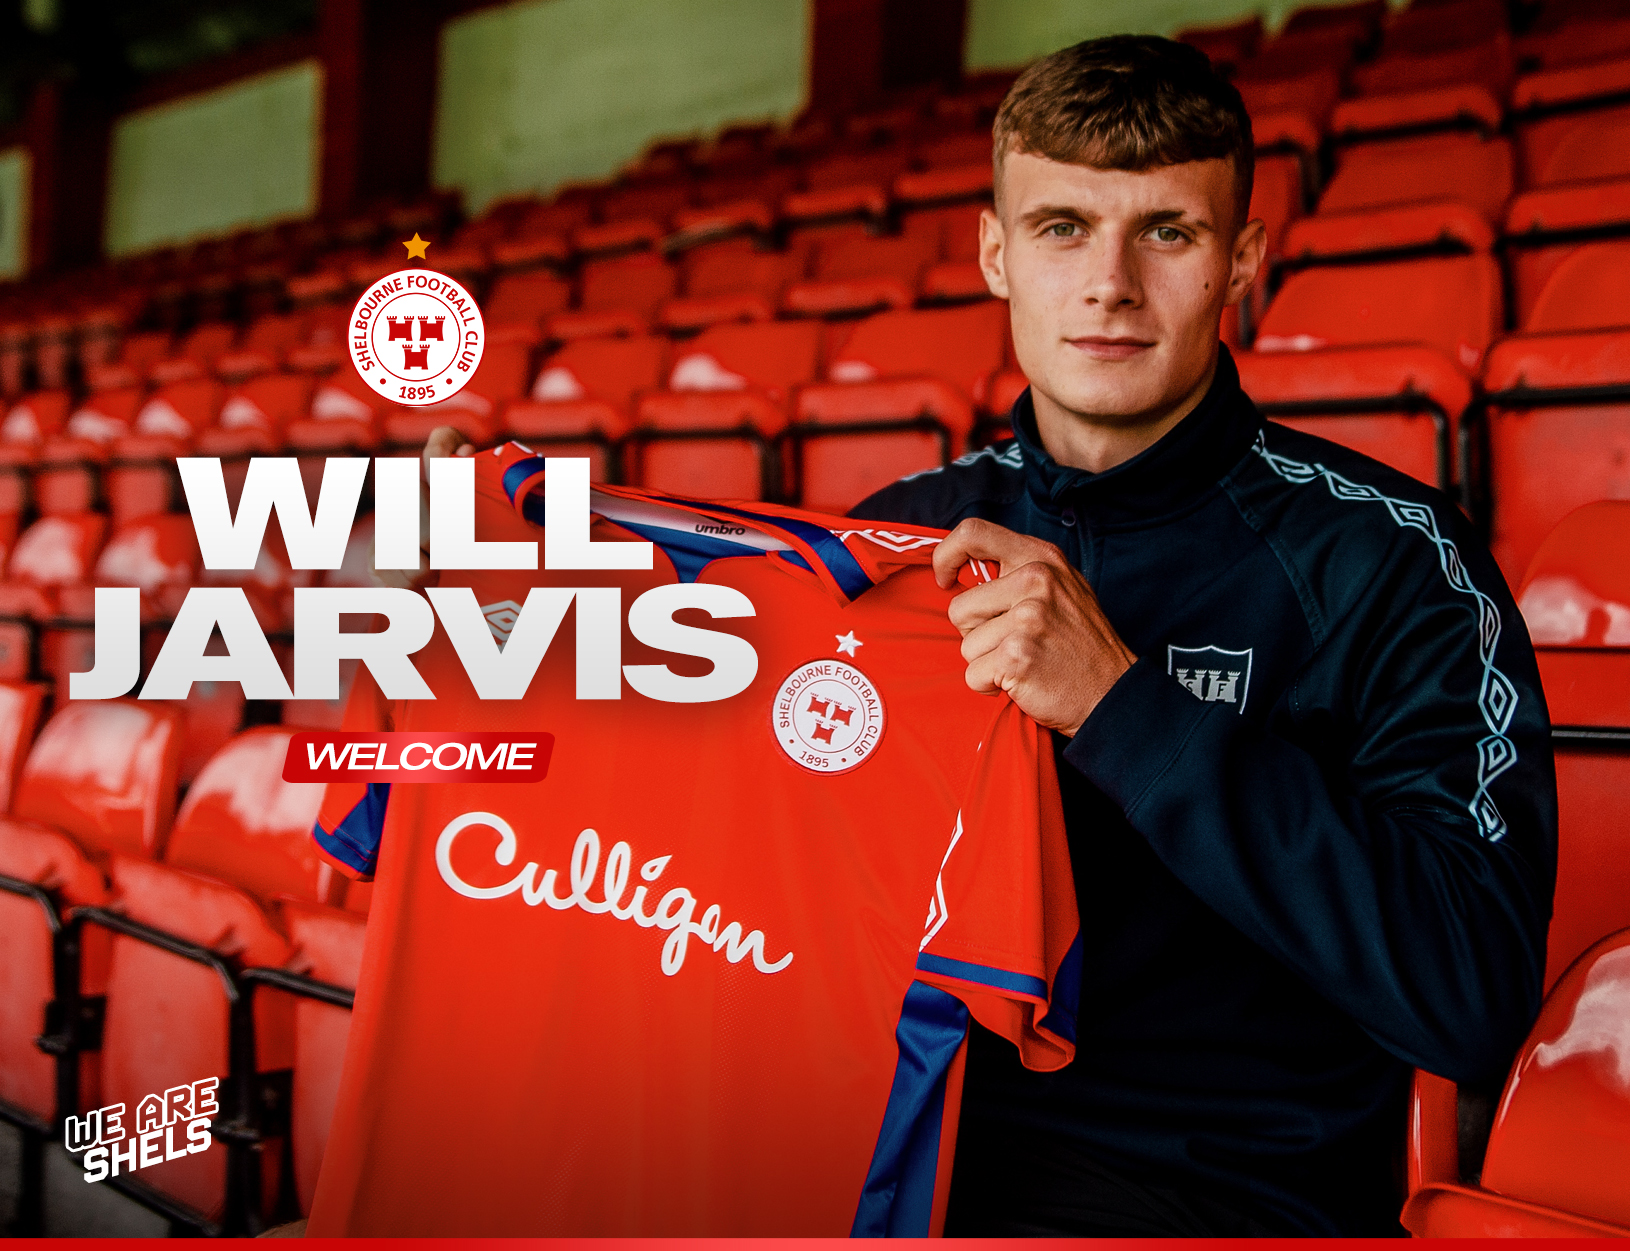 Will Jarvis signs for Shels